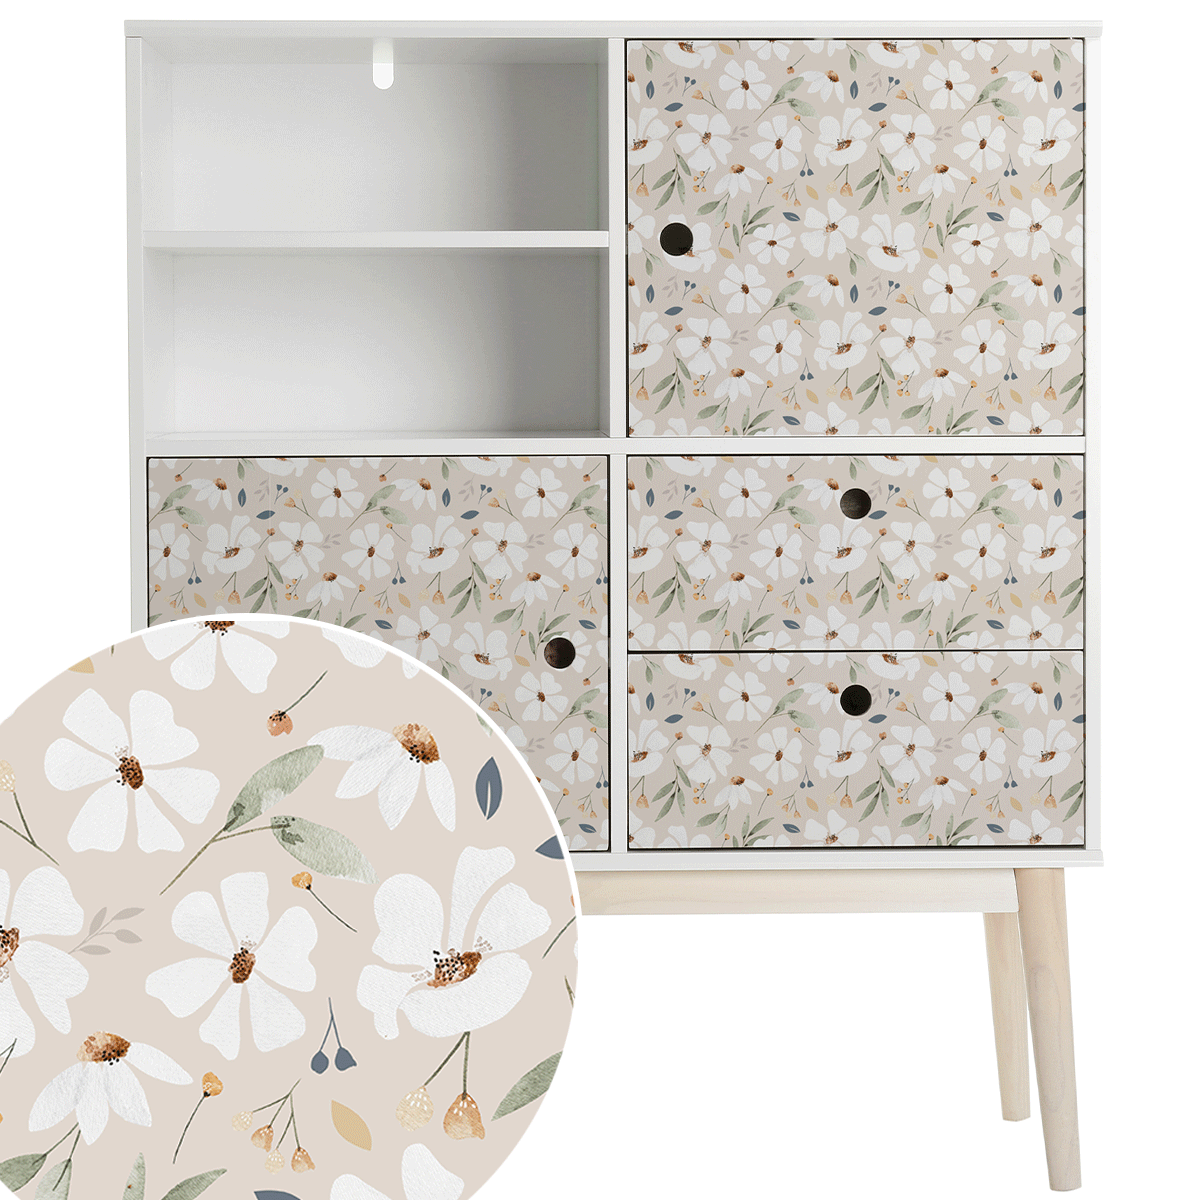 Furniture wrap - Sping flowers (champagne)